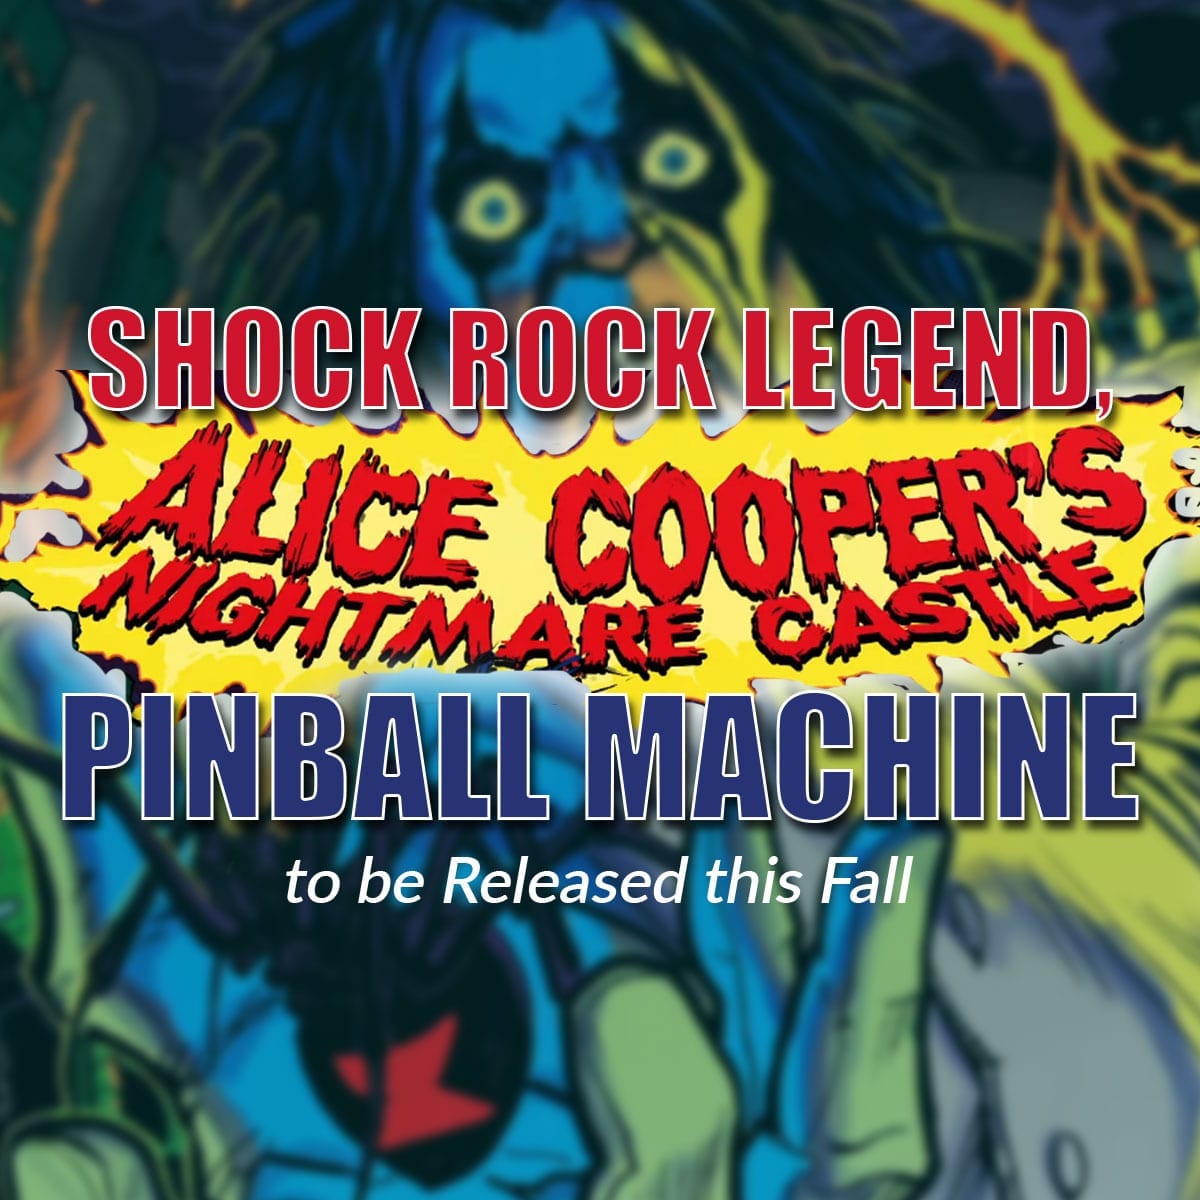 Shock Rock Legend, Alice Cooper’s Nightmare Castle Pinball Machine to be Released this Fall